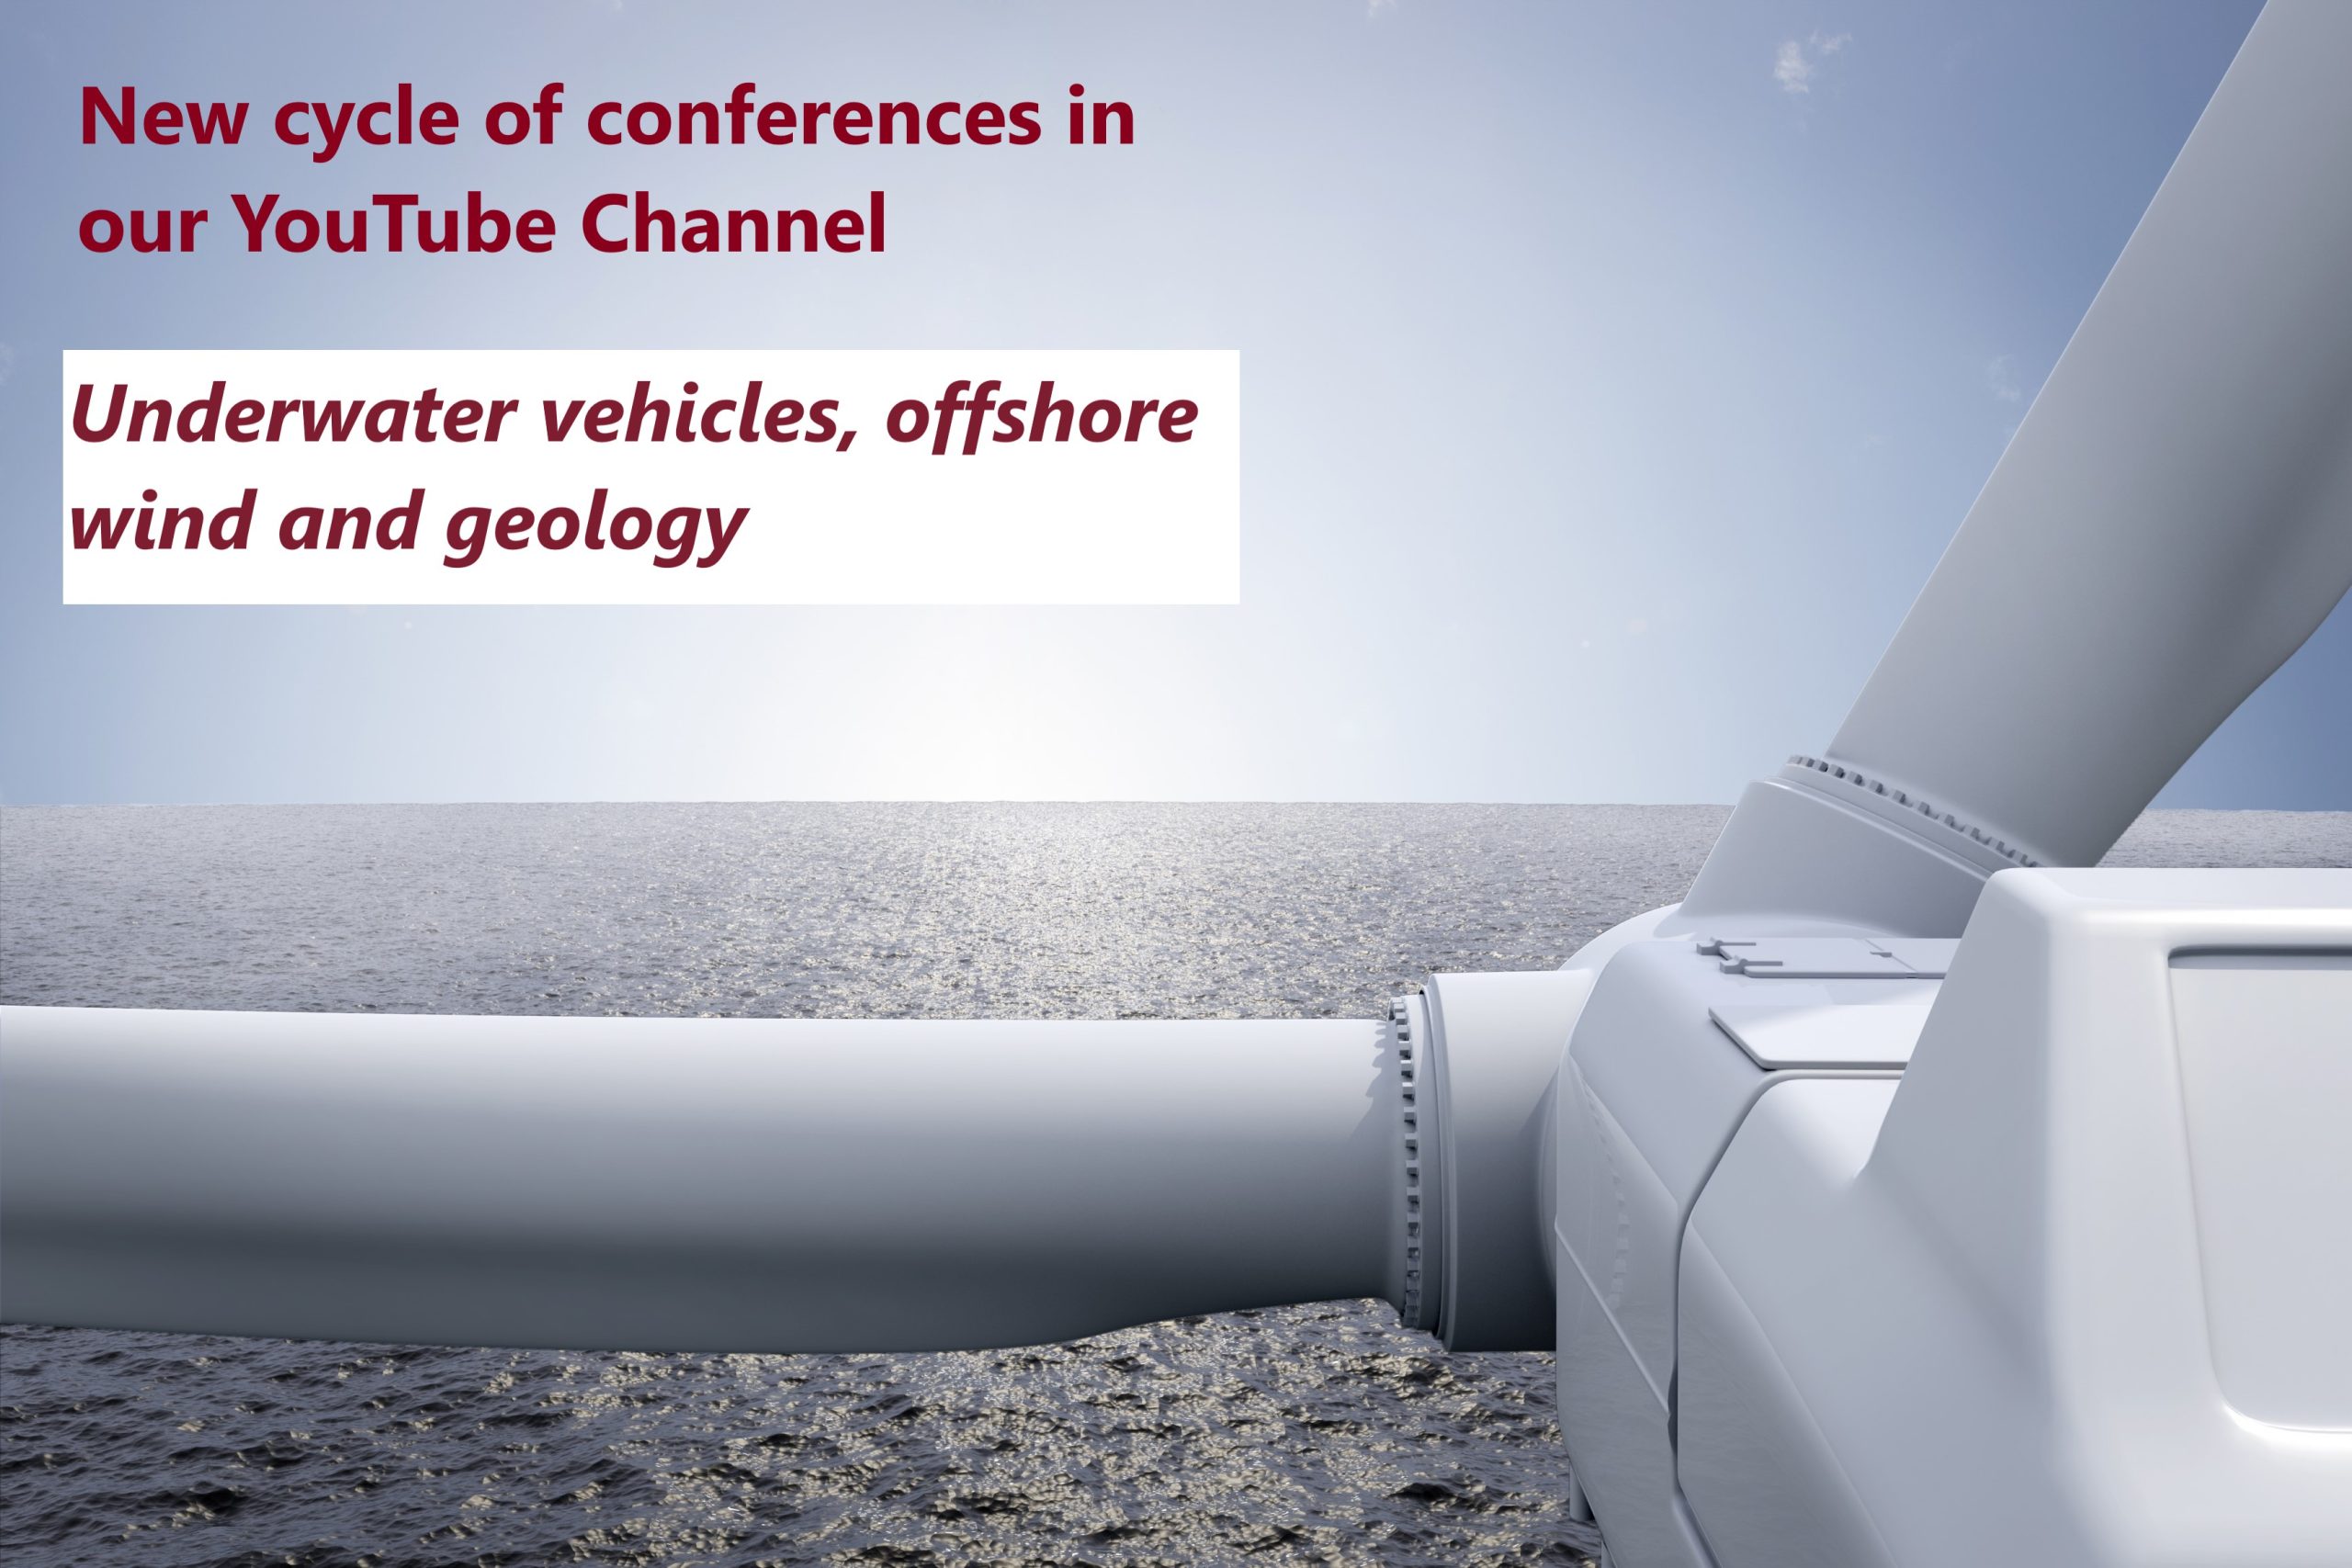 Underwater vehicles, offshore wind and geology: New cycle of conferences in YouTube